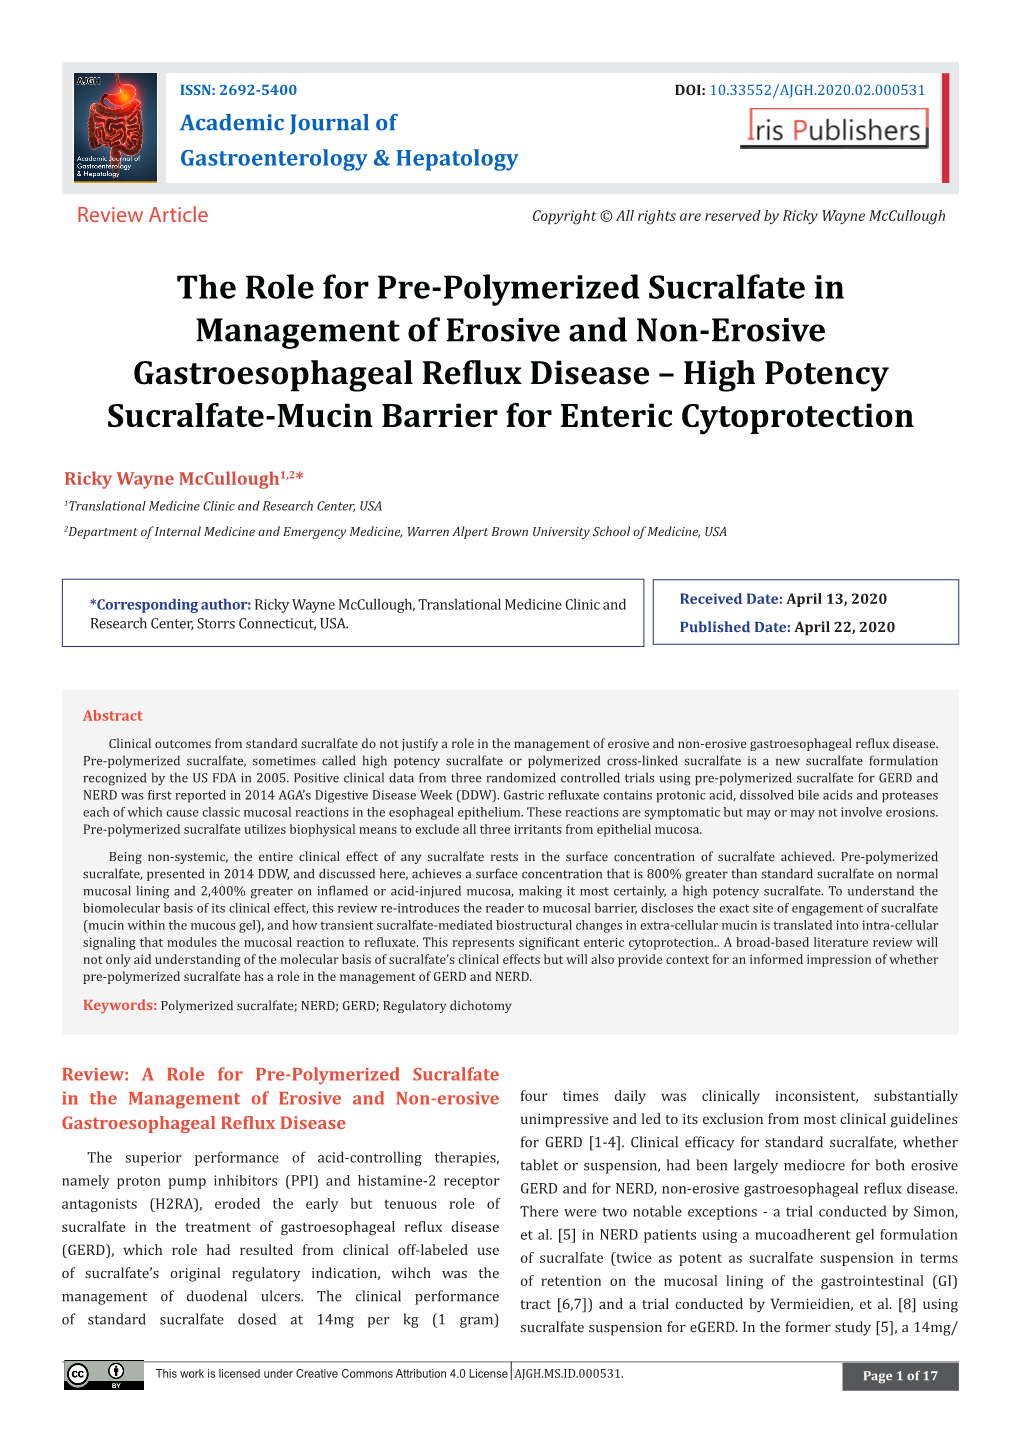 The Role for Pre-Polymerized Sucralfate In